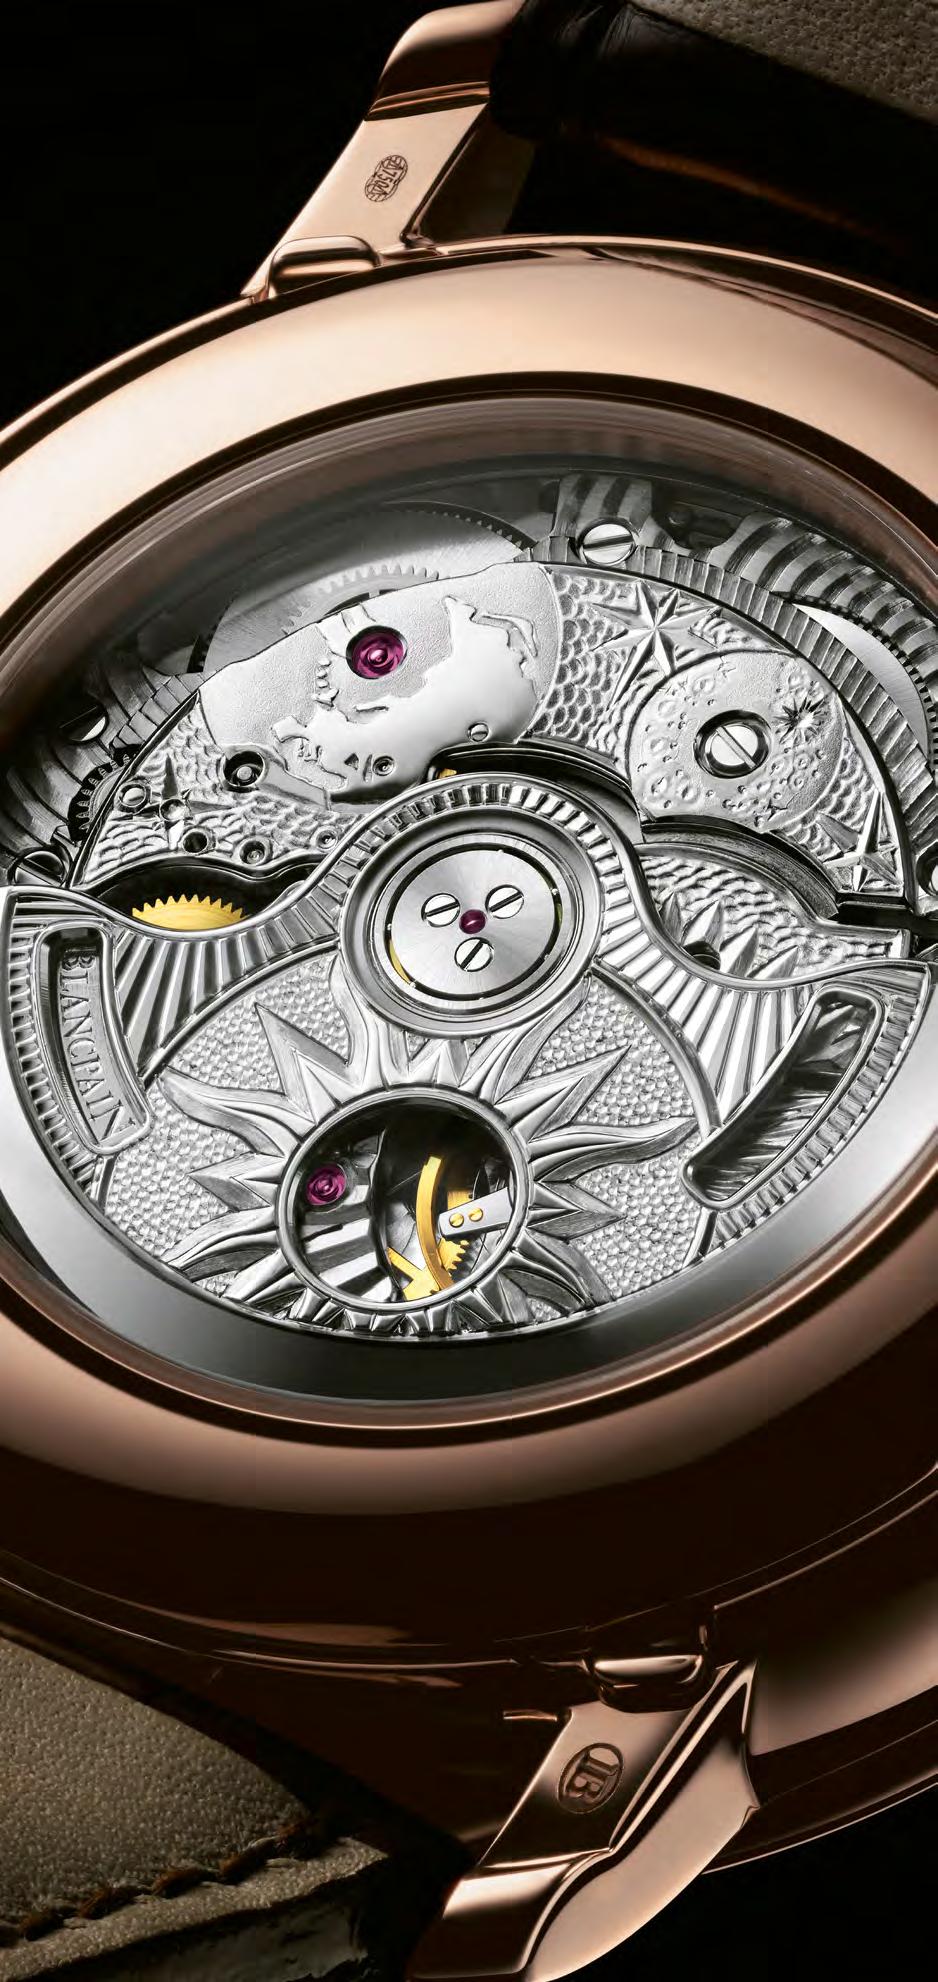 6638-3631-55B ÉQUATION DU TEMPS MARCHANTE CALIBRE 3863 Limited edition of 188 72-hour power reserve Running equation of time Perpetual calendar Retrograde moon phases Small seconds